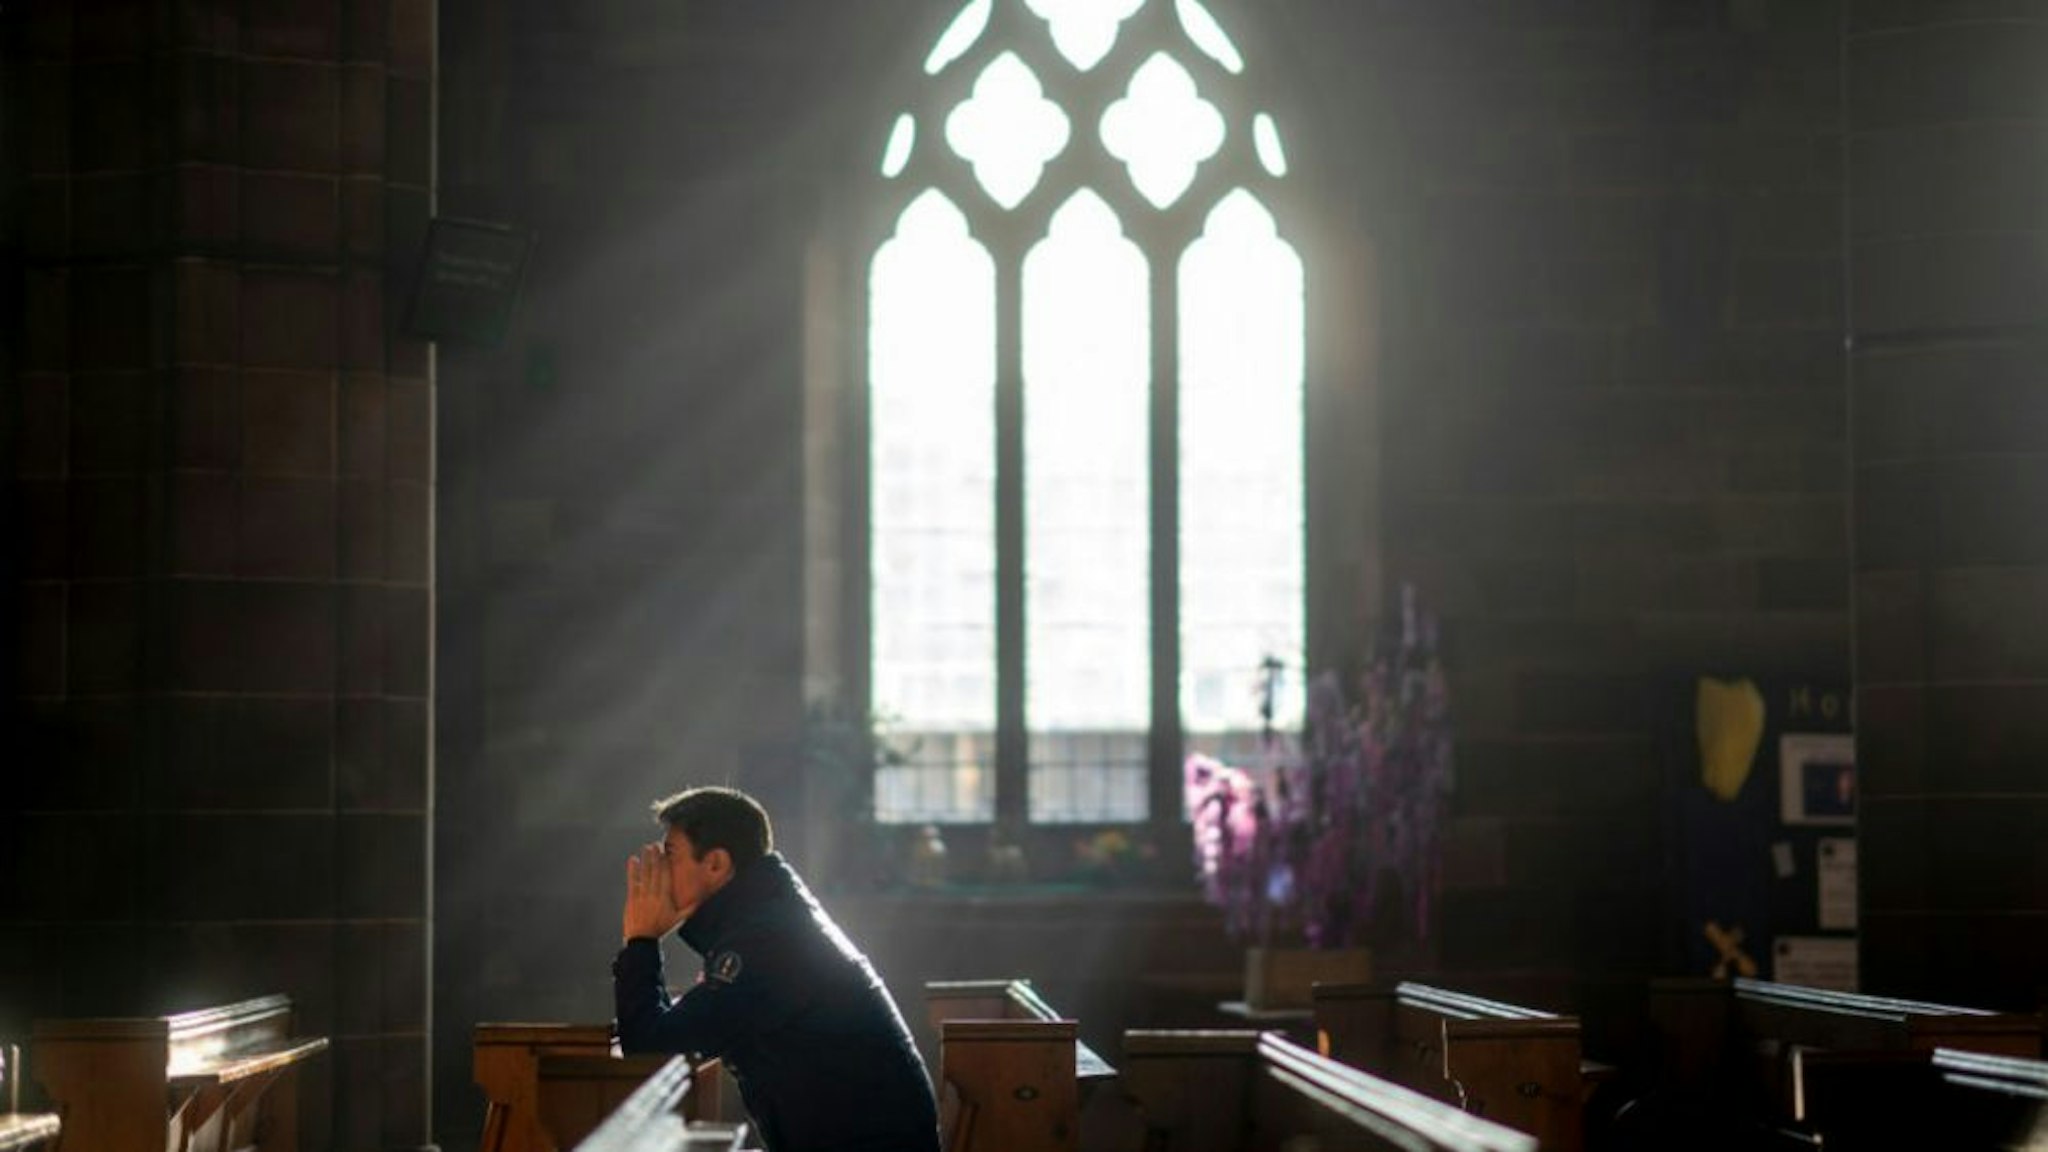 A man prays in a church as shoppers make their last minute purchases on Christmas Eve on December 24, 2018 in Birmingham, England.